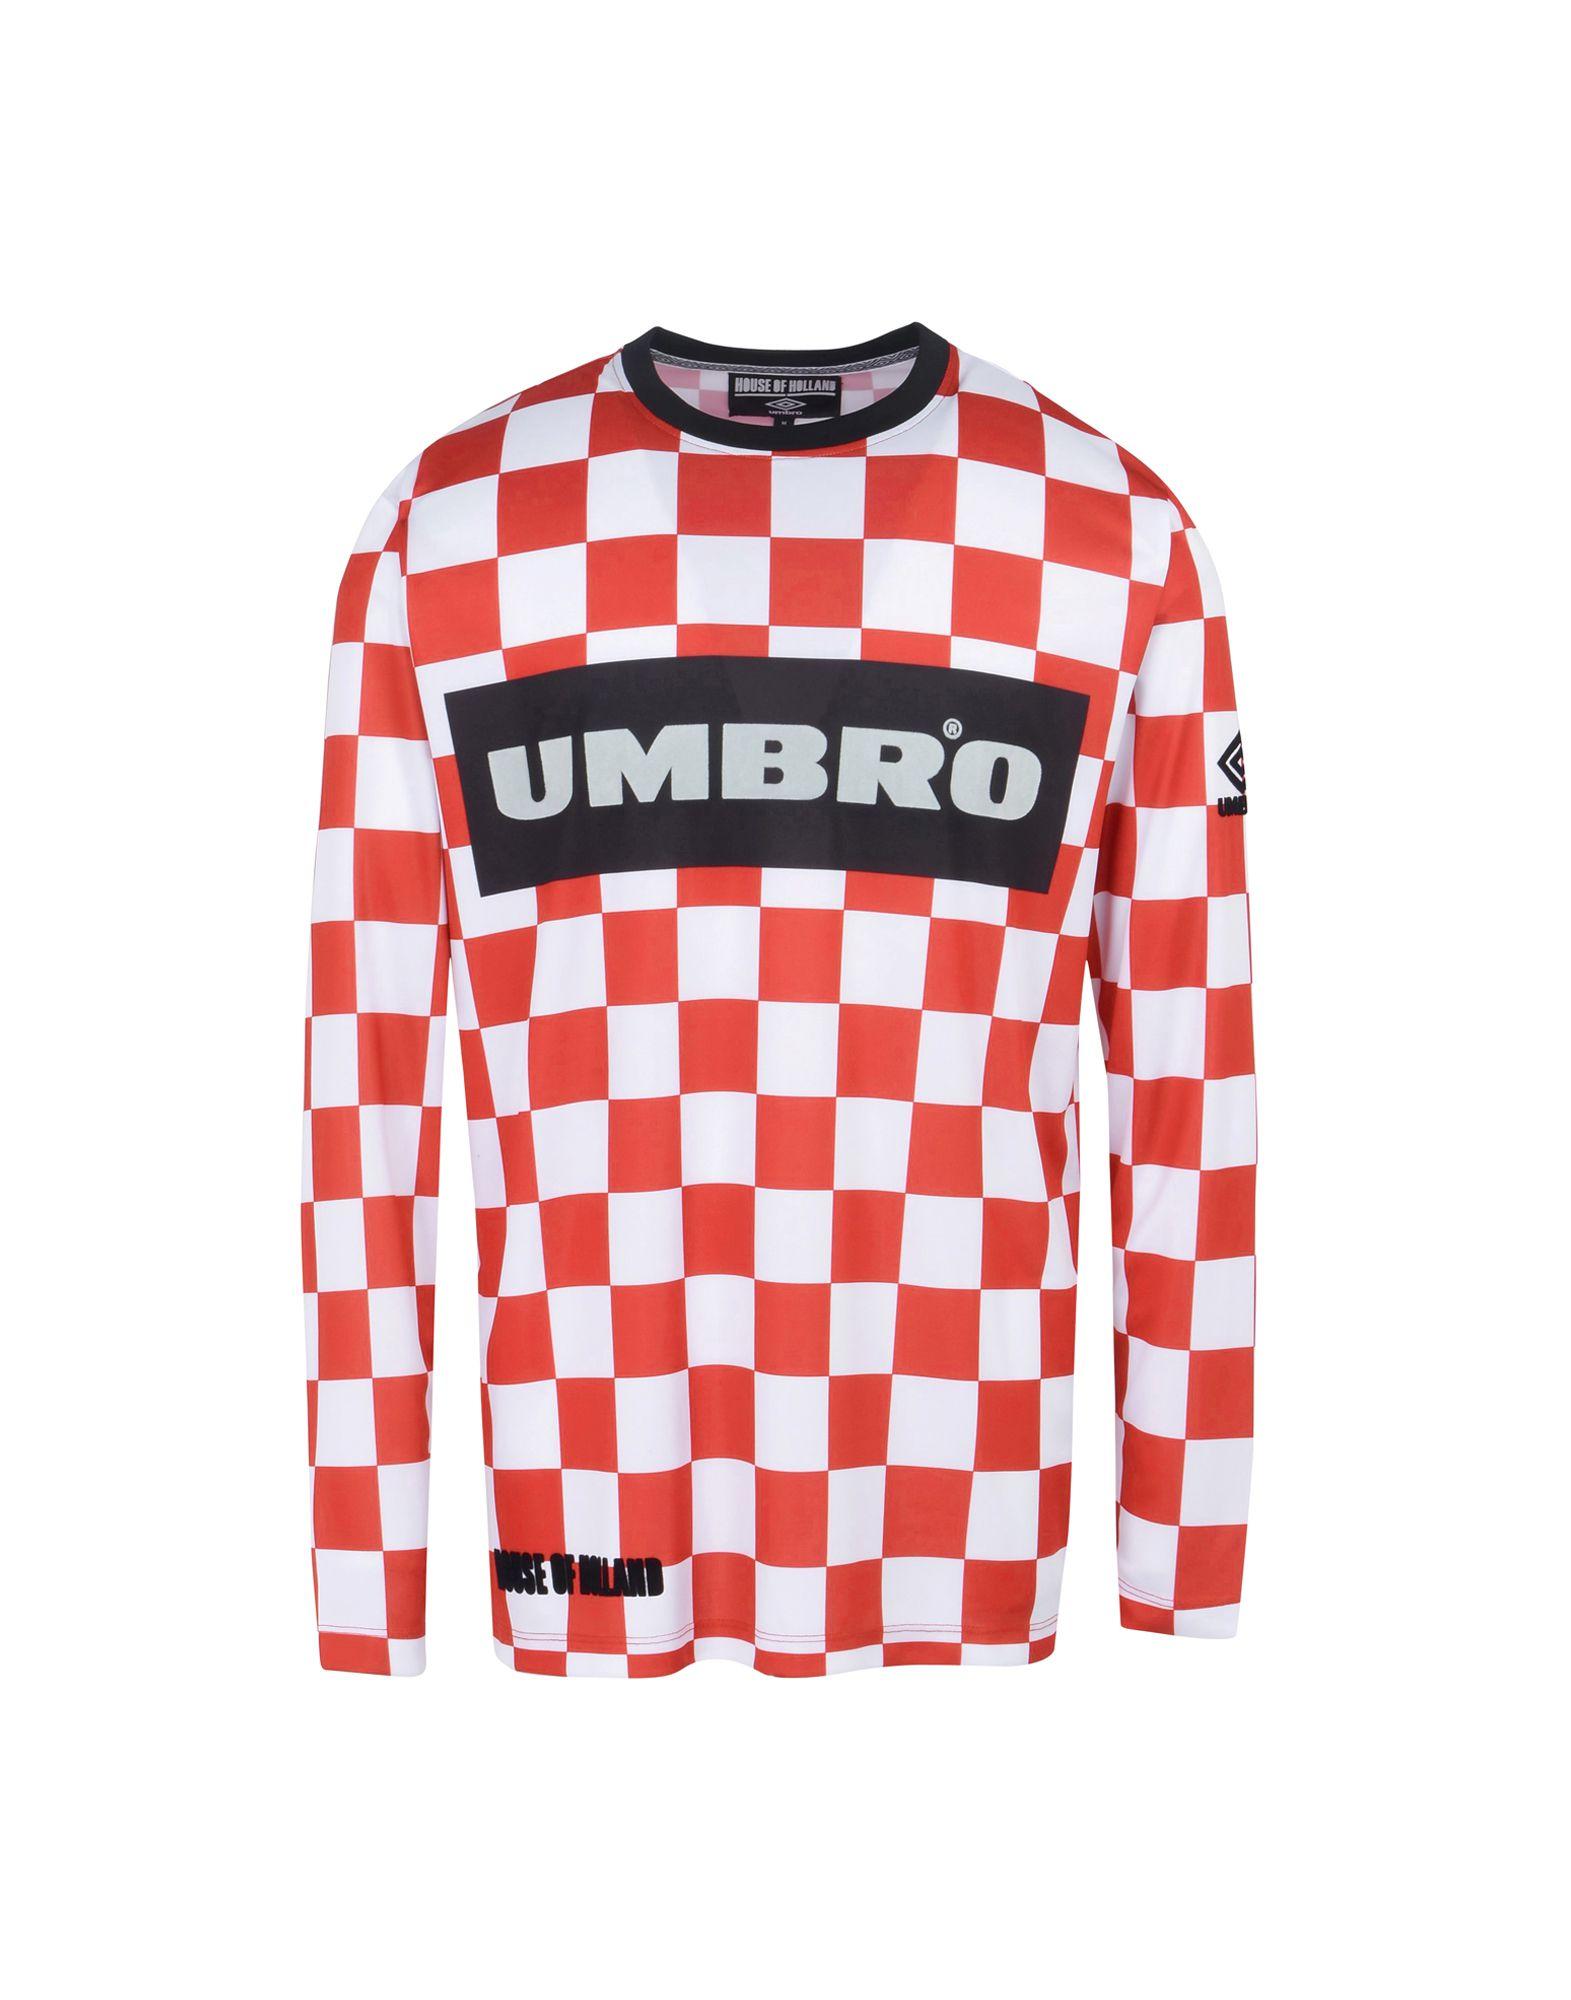 umbro-sports-t-shirt-in-red-modesens